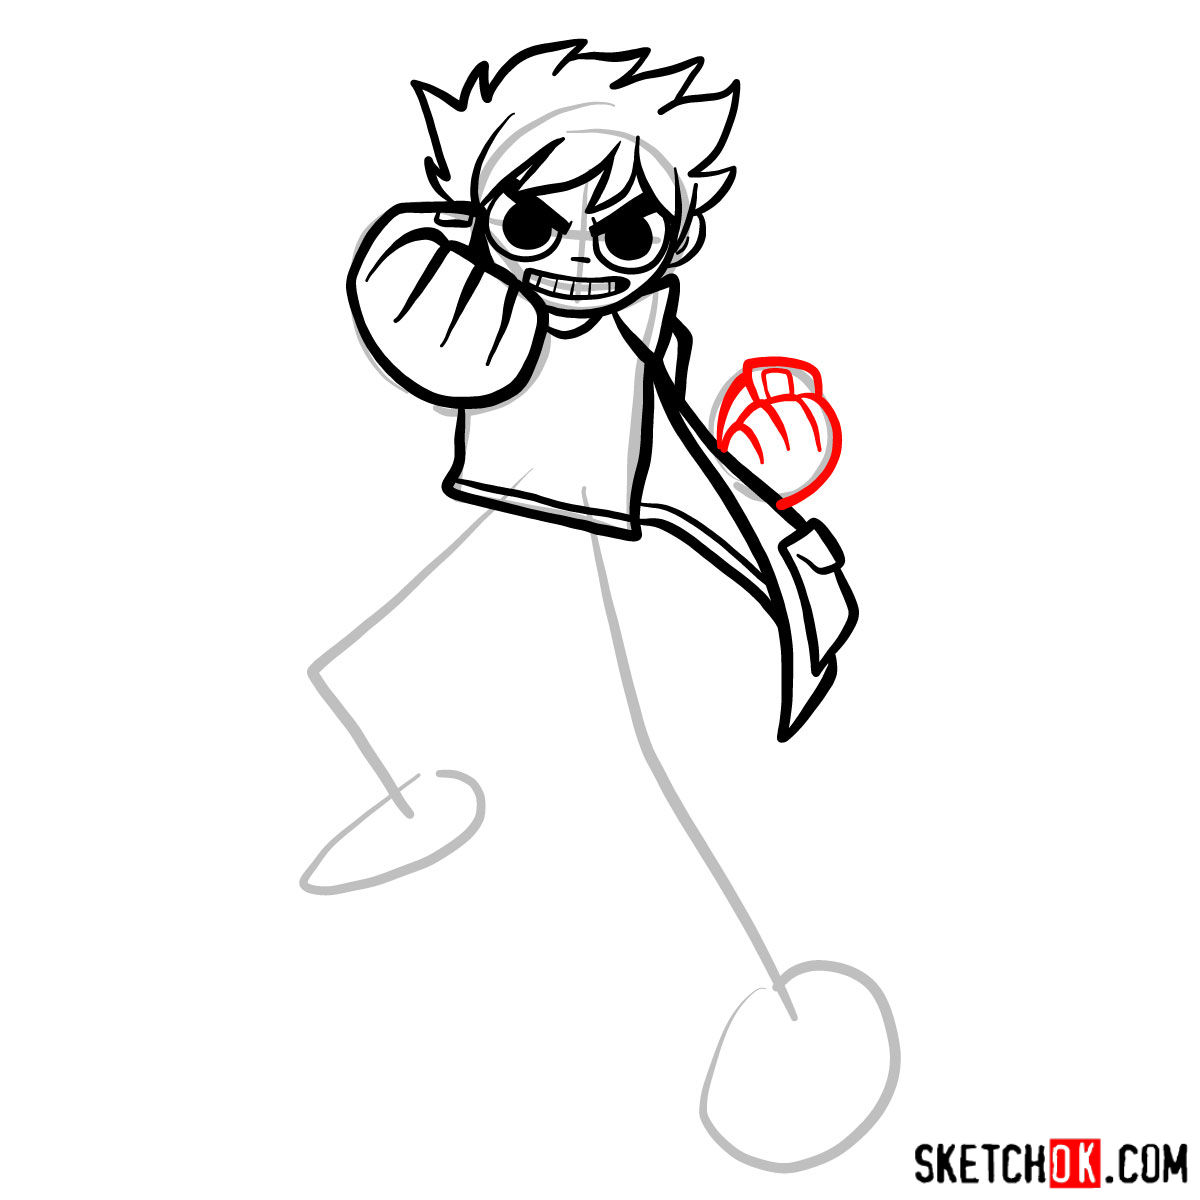 How to Draw Scott Pilgrim Capturing the Essence of the Character